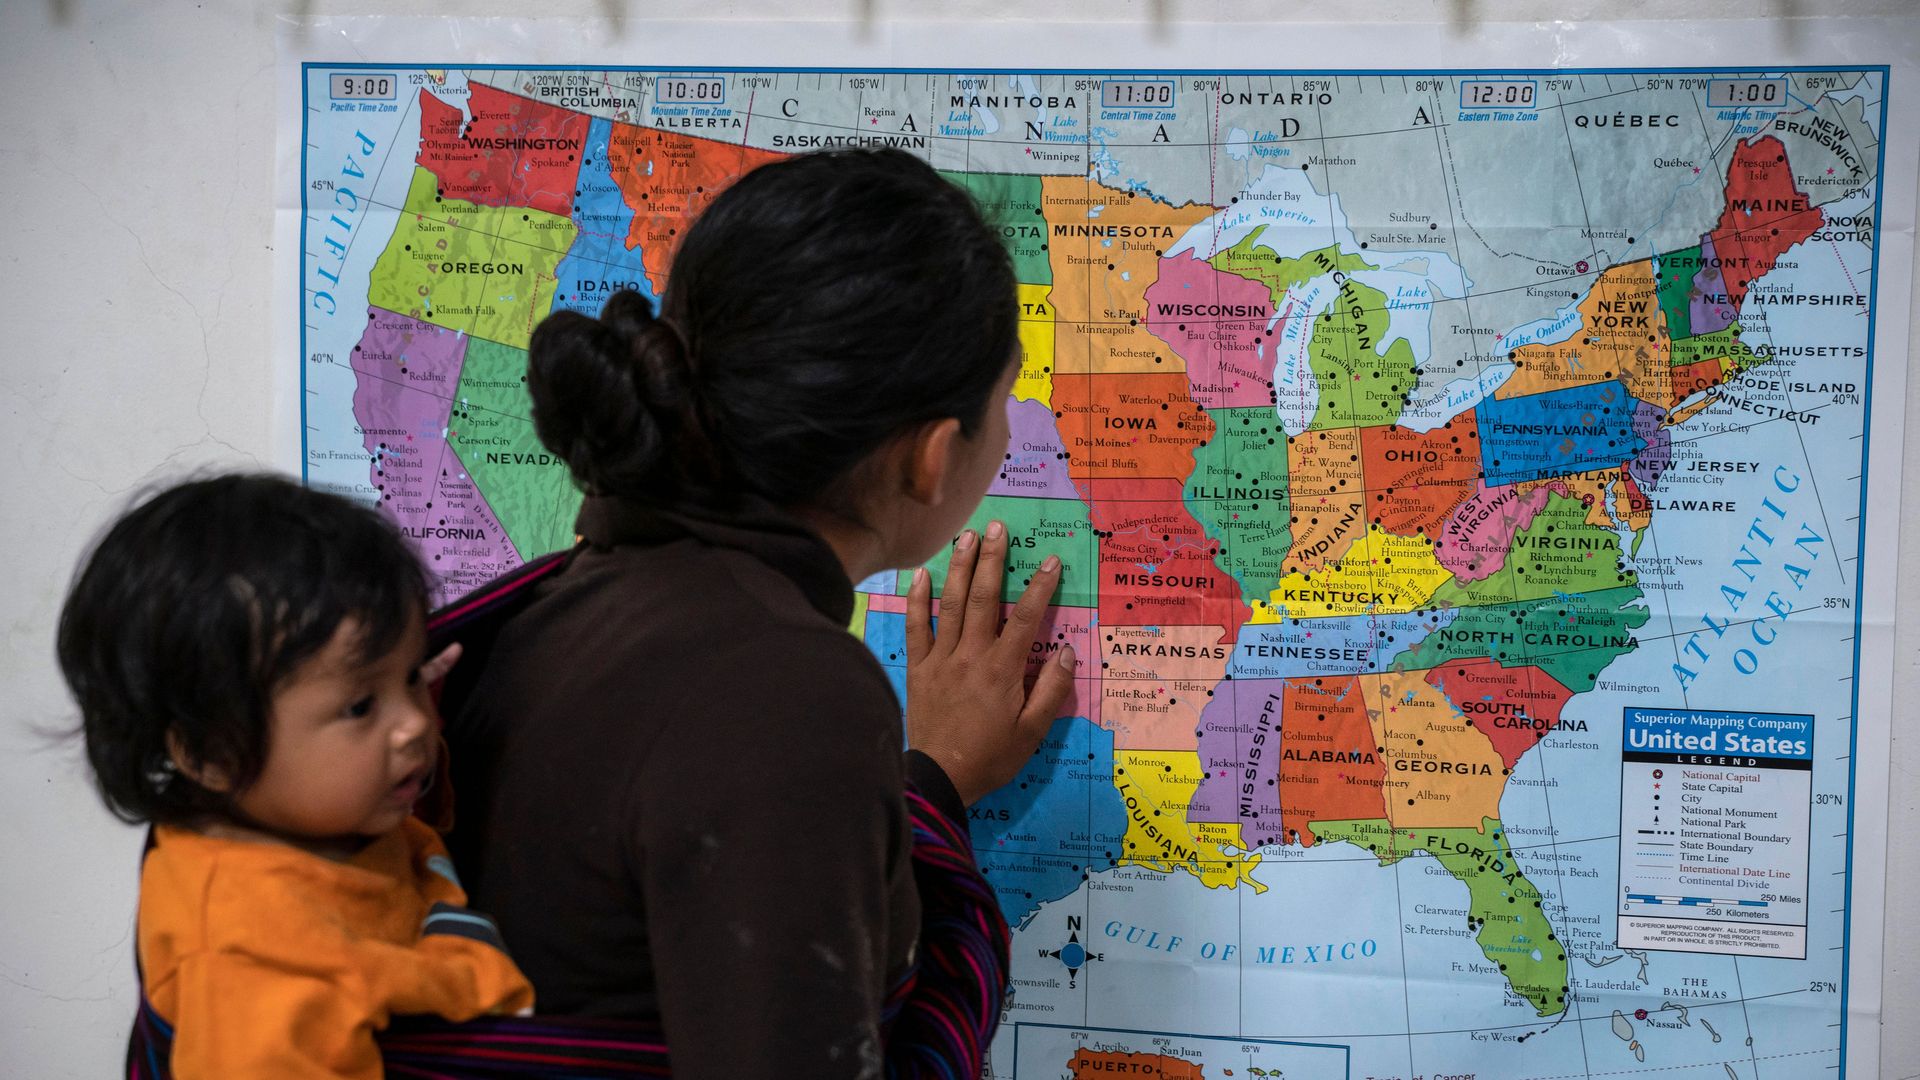 Guatemalan woman looking at a map of the U.S. with her baby